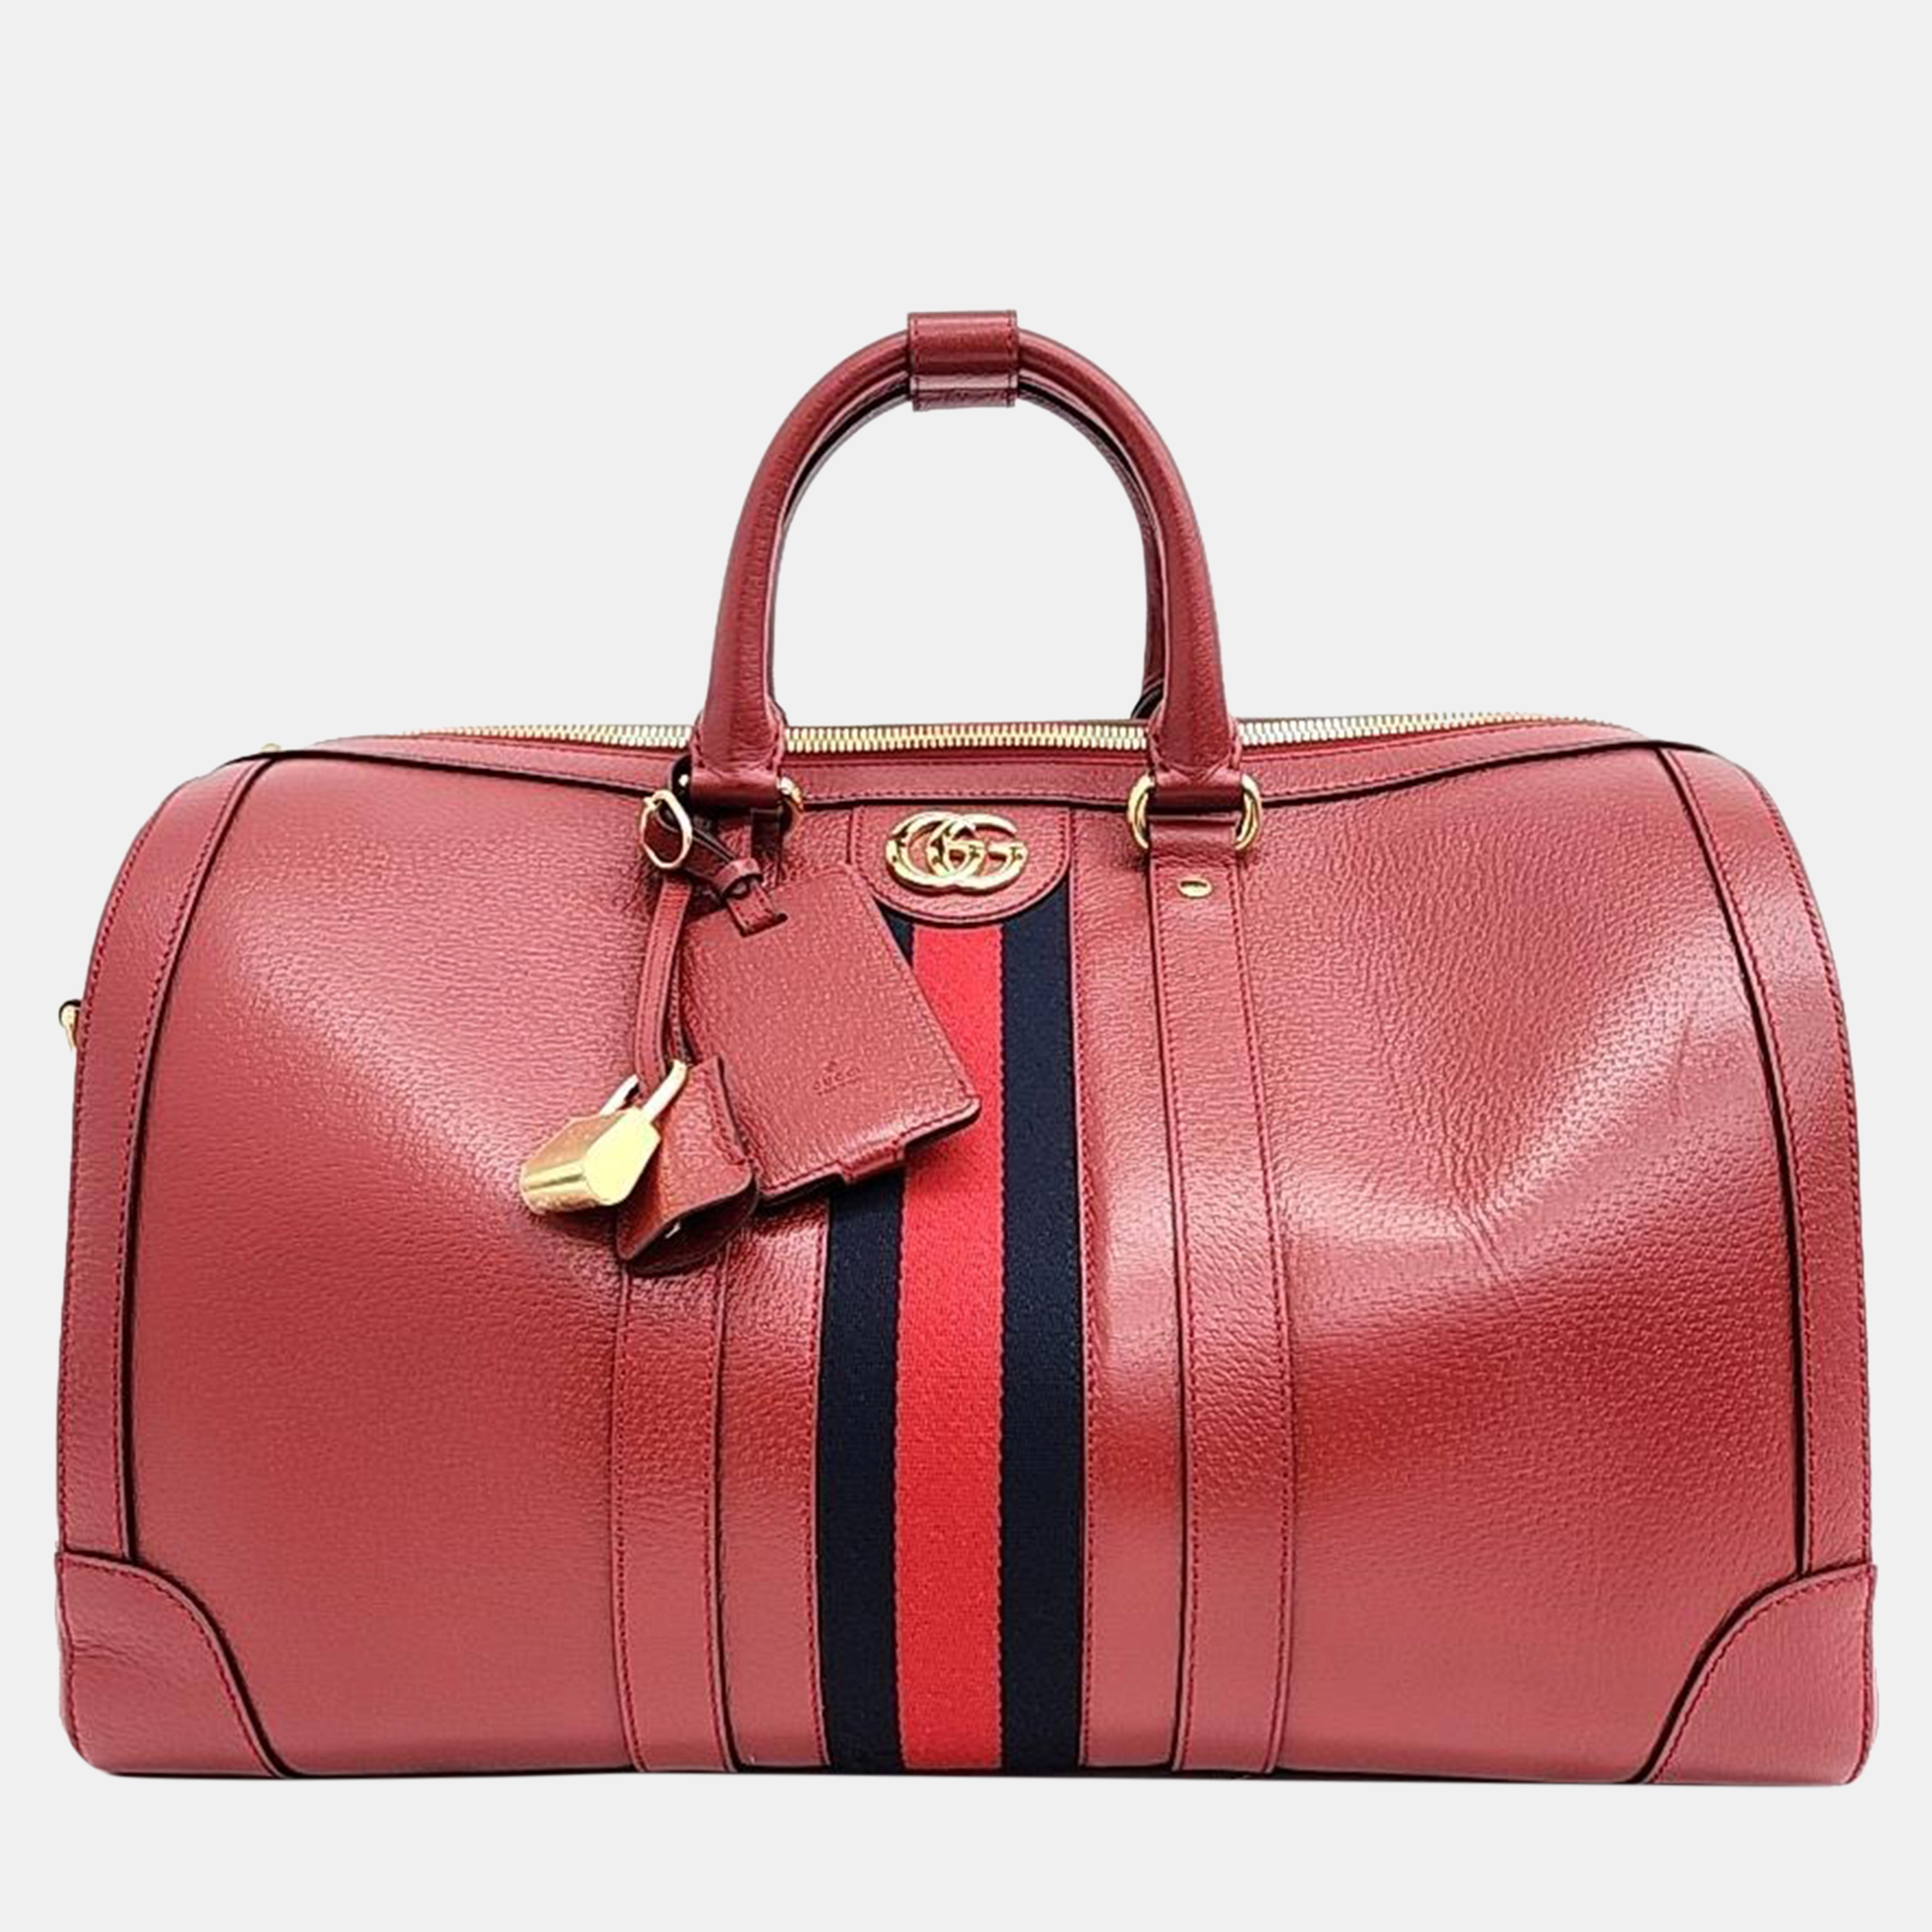 Pre-owned Gucci Red Leather Medium Savoy Duffle Bag